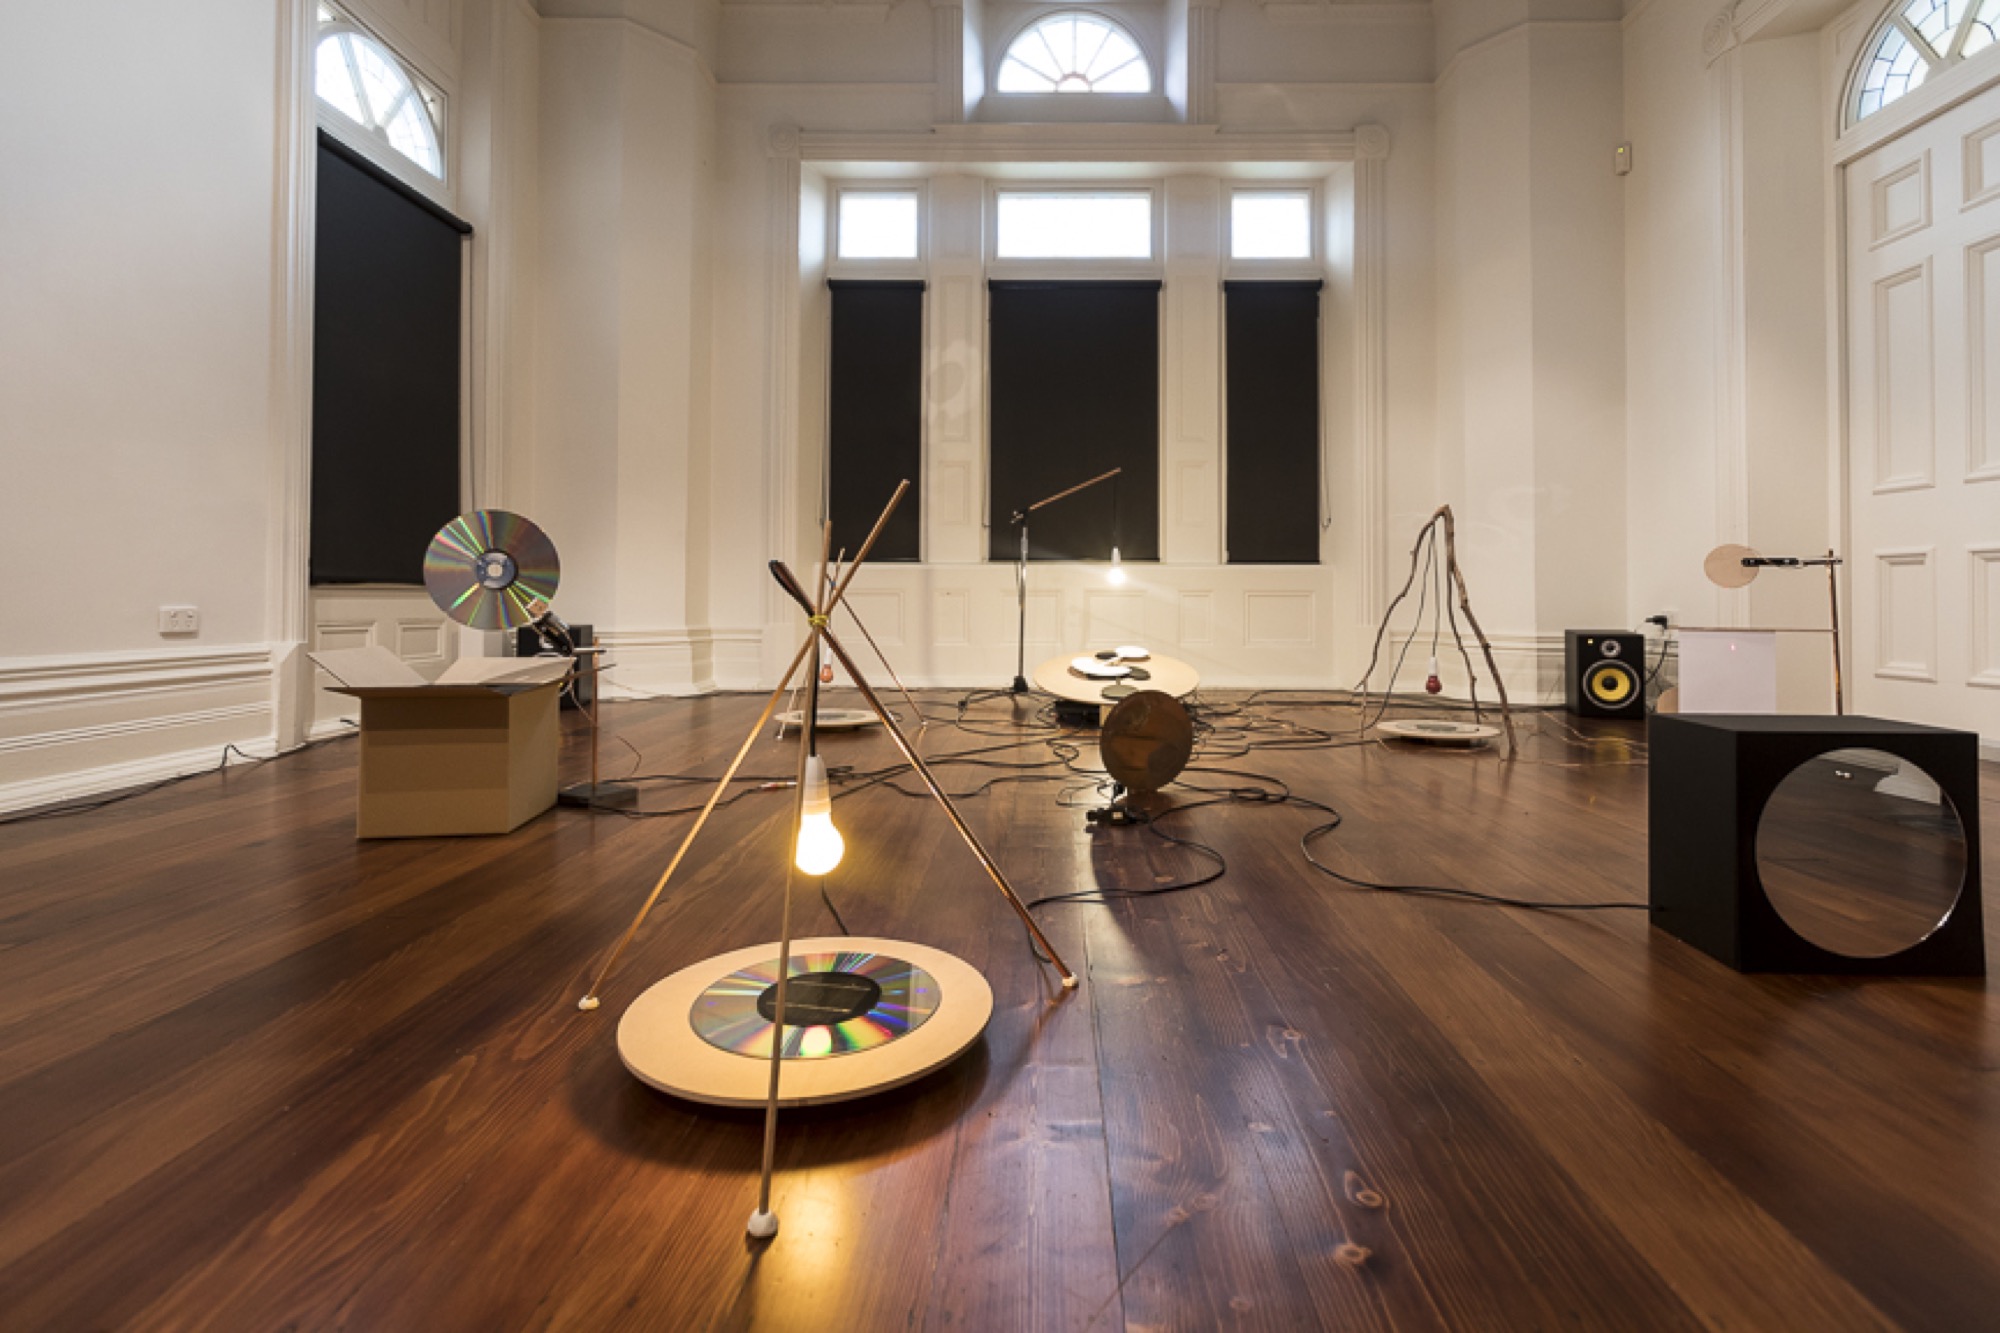 Michael G. F. Prior, <em>Open Version</em>, solar panels, laser discs, lasers, copper, bronze, microphone stand, timber, mirror, ball bearing, eucalypt branch, cardboard, paper, speakers, motors, fan, custom electronics, 2017, installation view, Bundoora Homestead, 2019 Photo: courtesy of the gallery